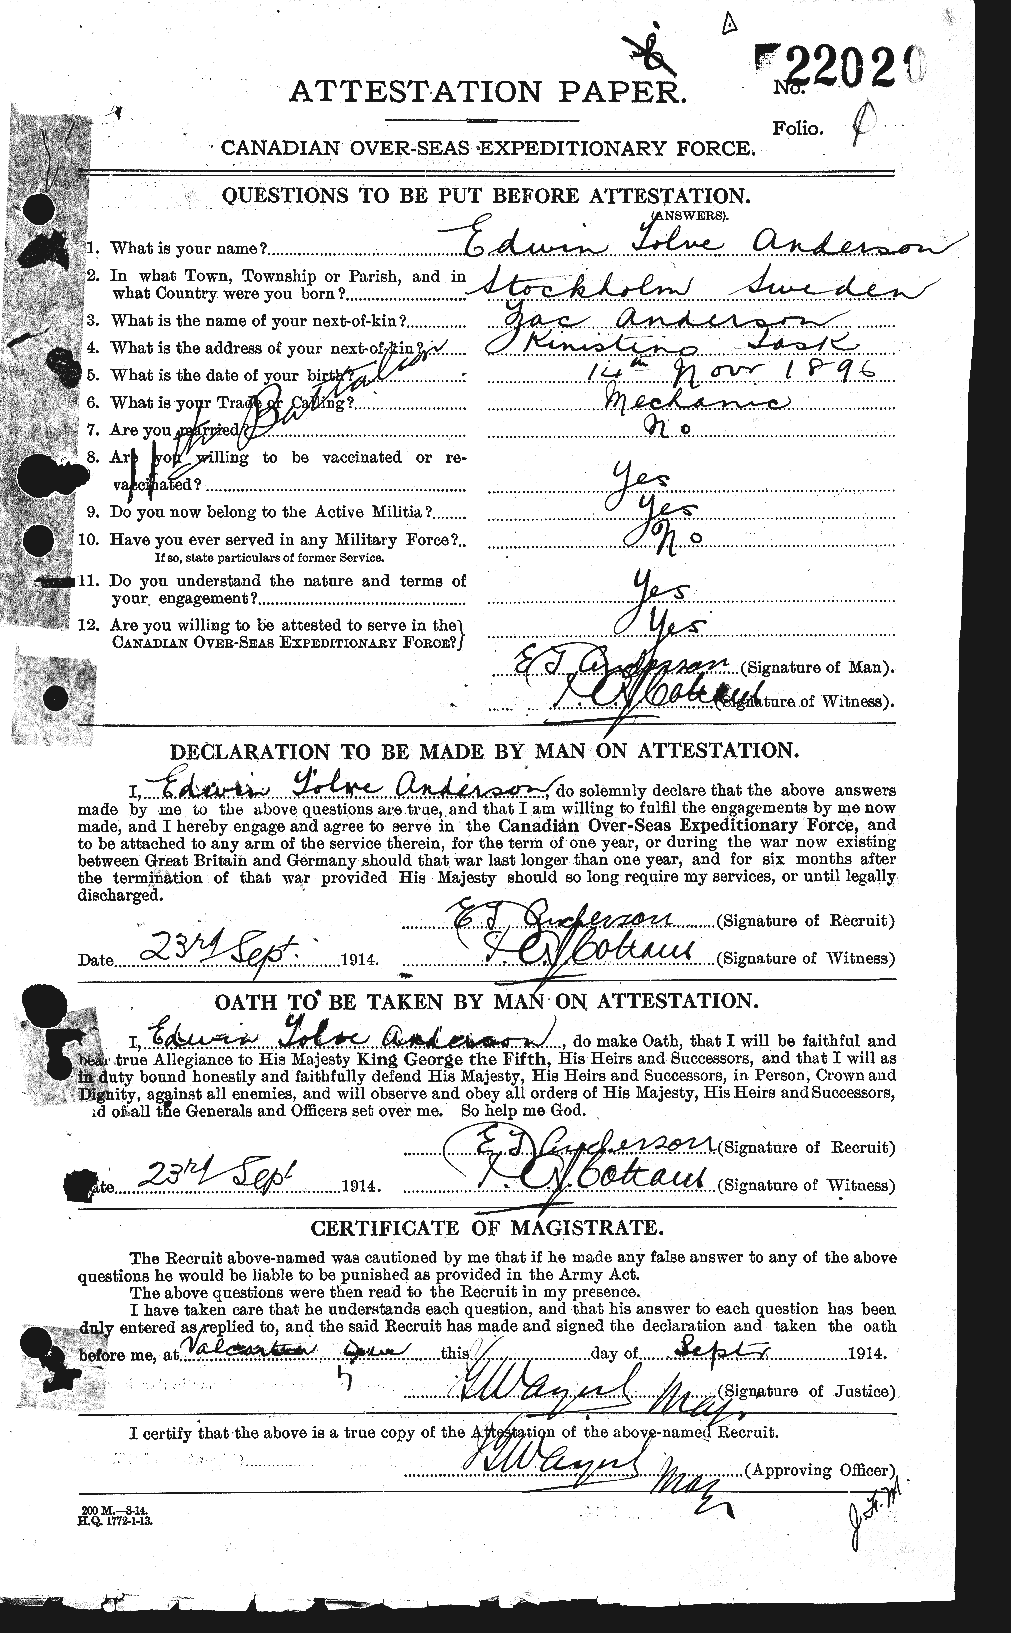 Personnel Records of the First World War - CEF 209946a